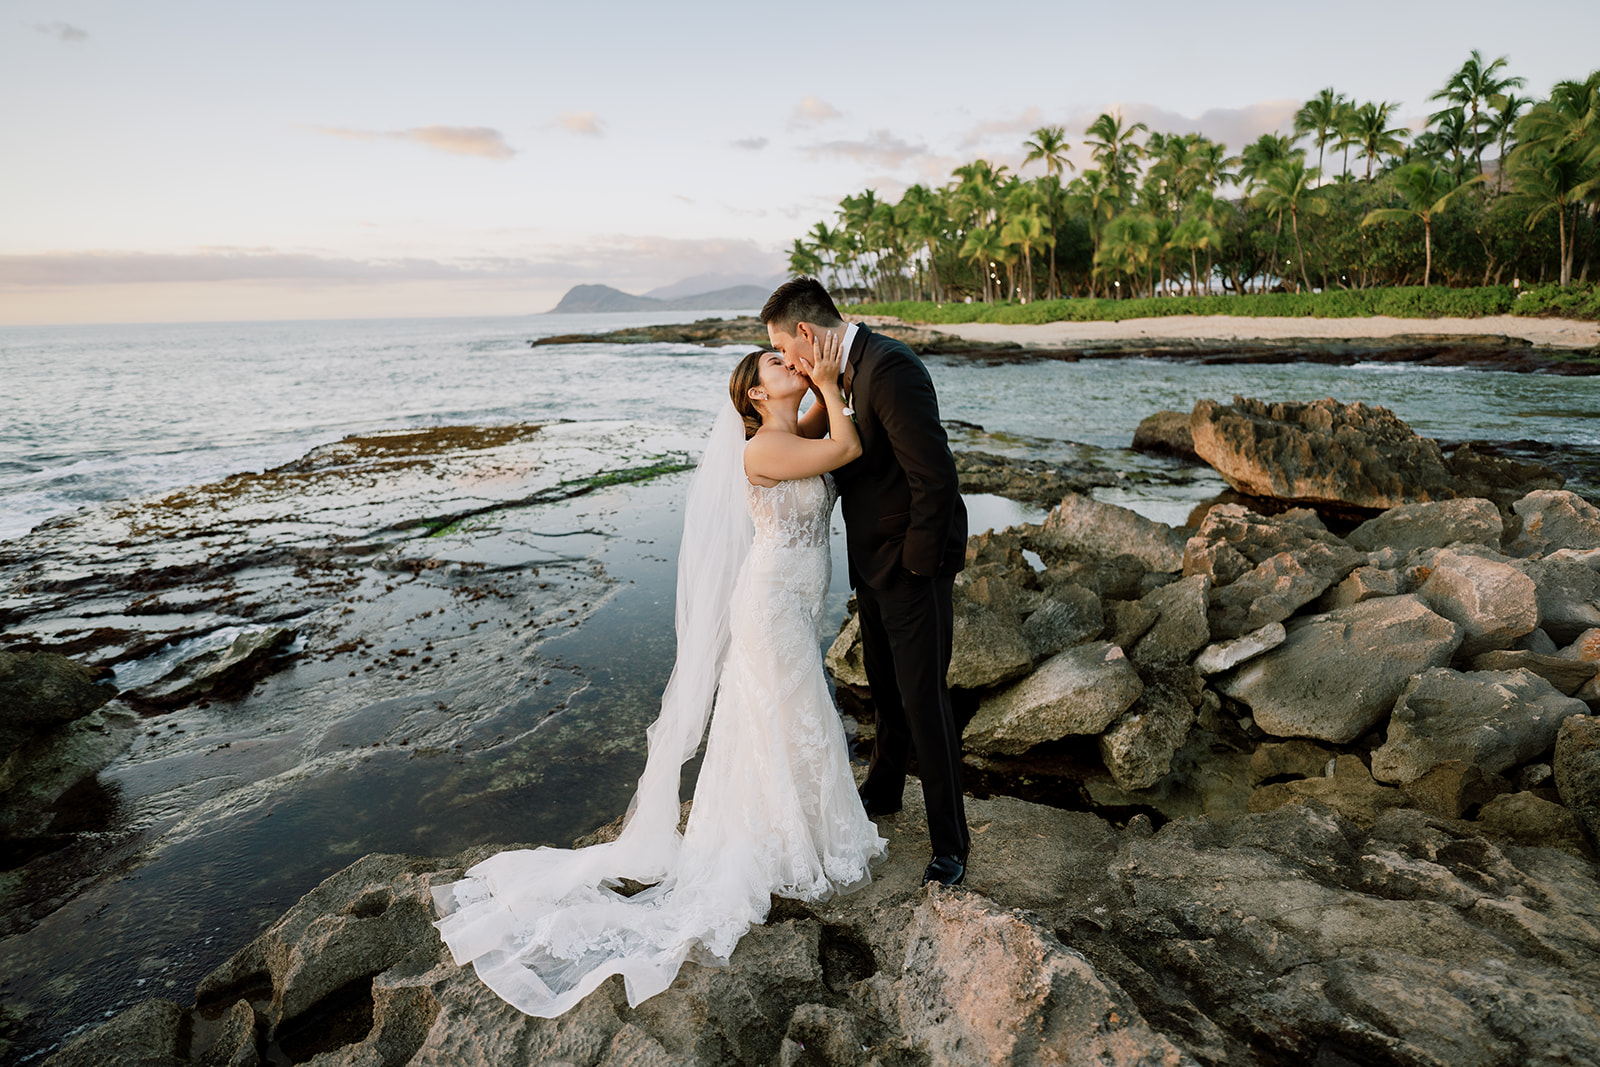 A bride and groom kissing on the rocks during sunset in Oahu Hawaii.